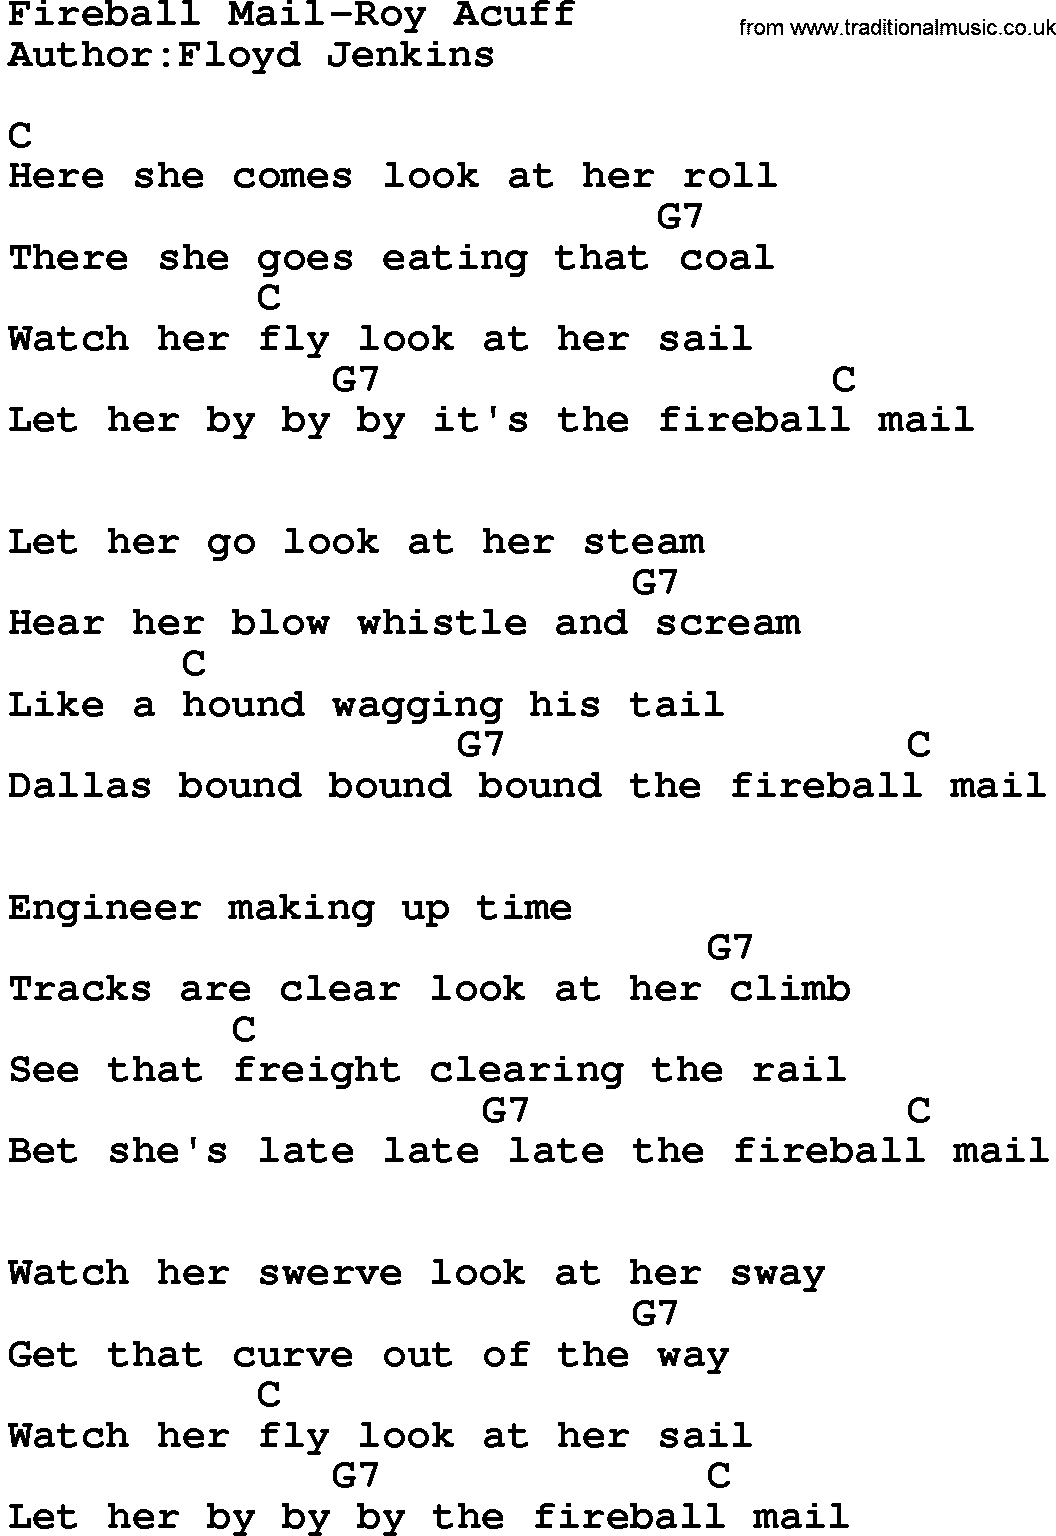 Country music song: Fireball Mail-Roy Acuff lyrics and chords